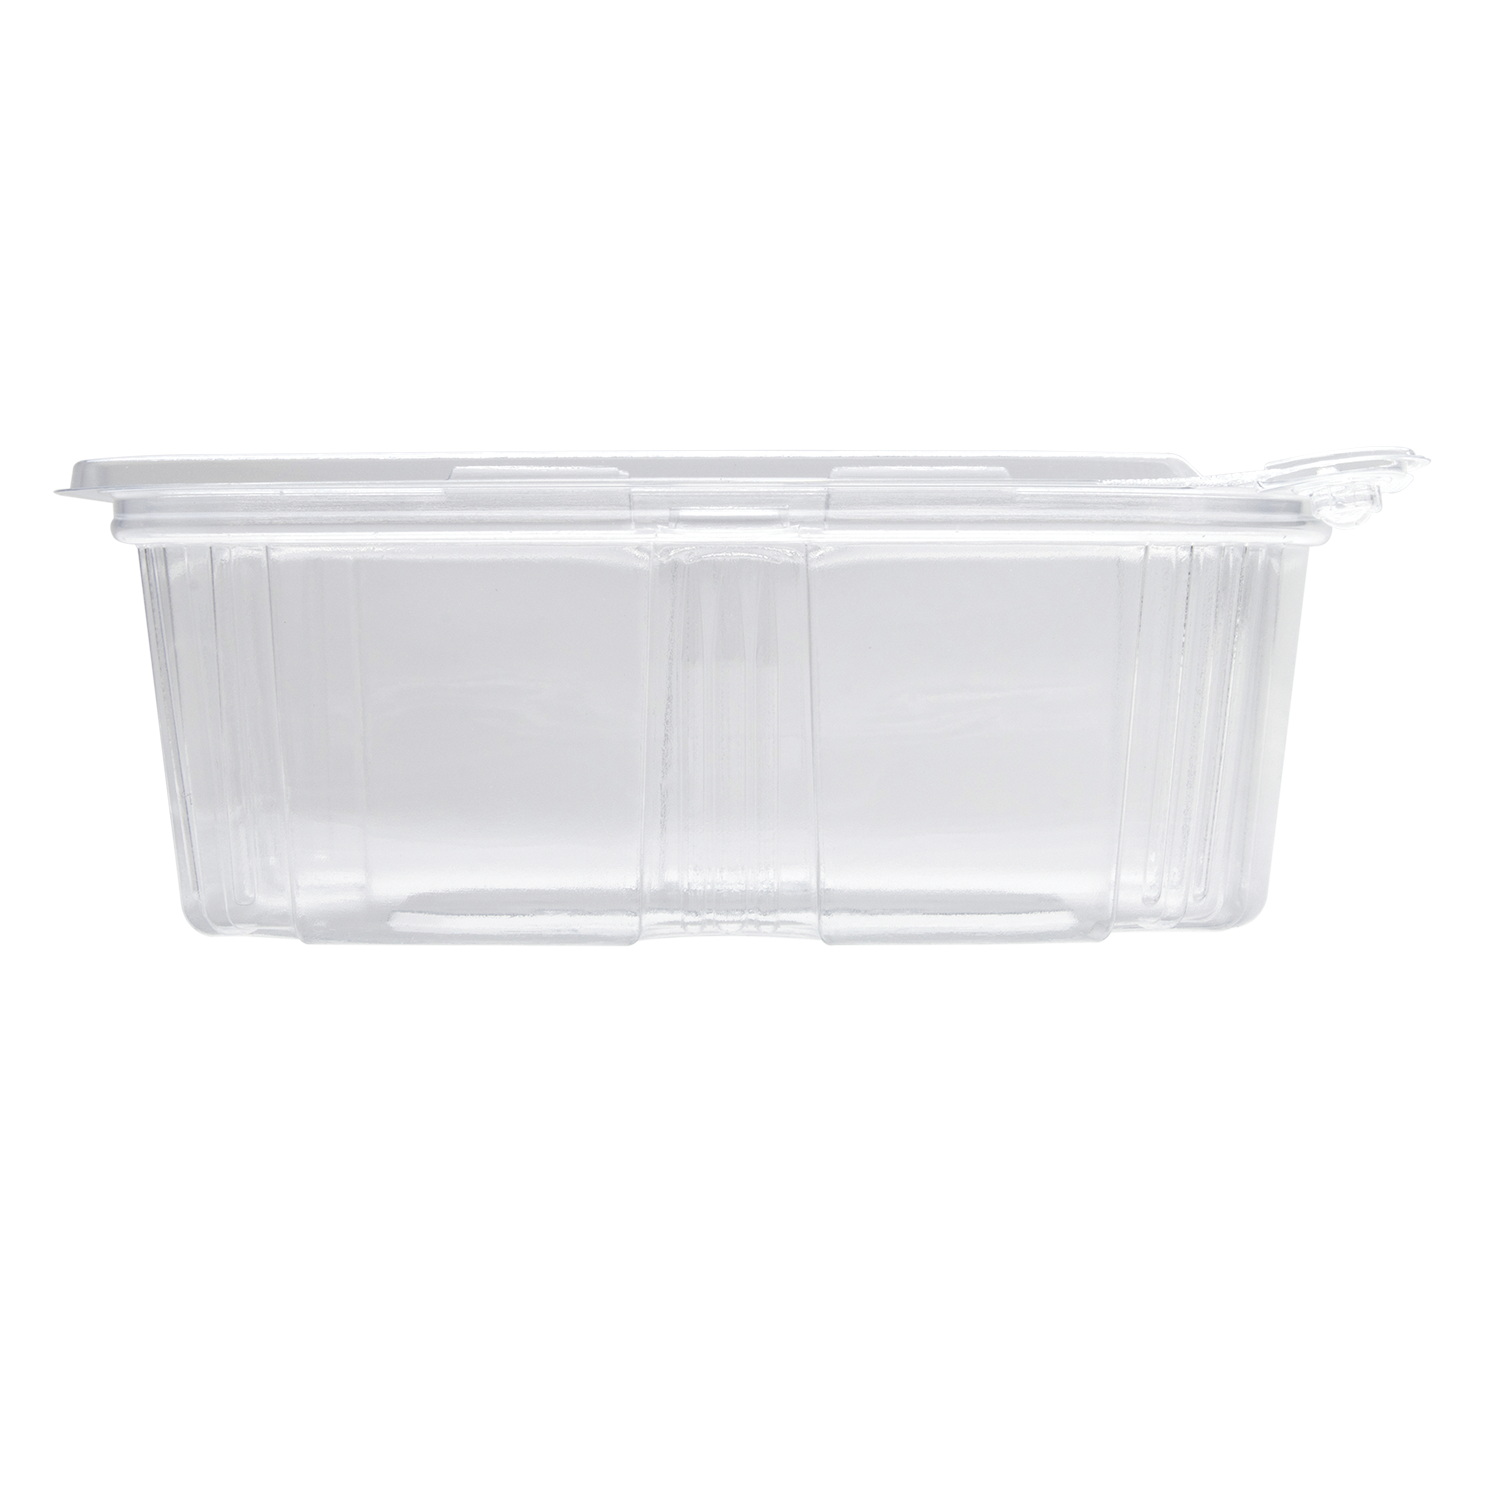 32 oz. Plastic Hinged Food Container